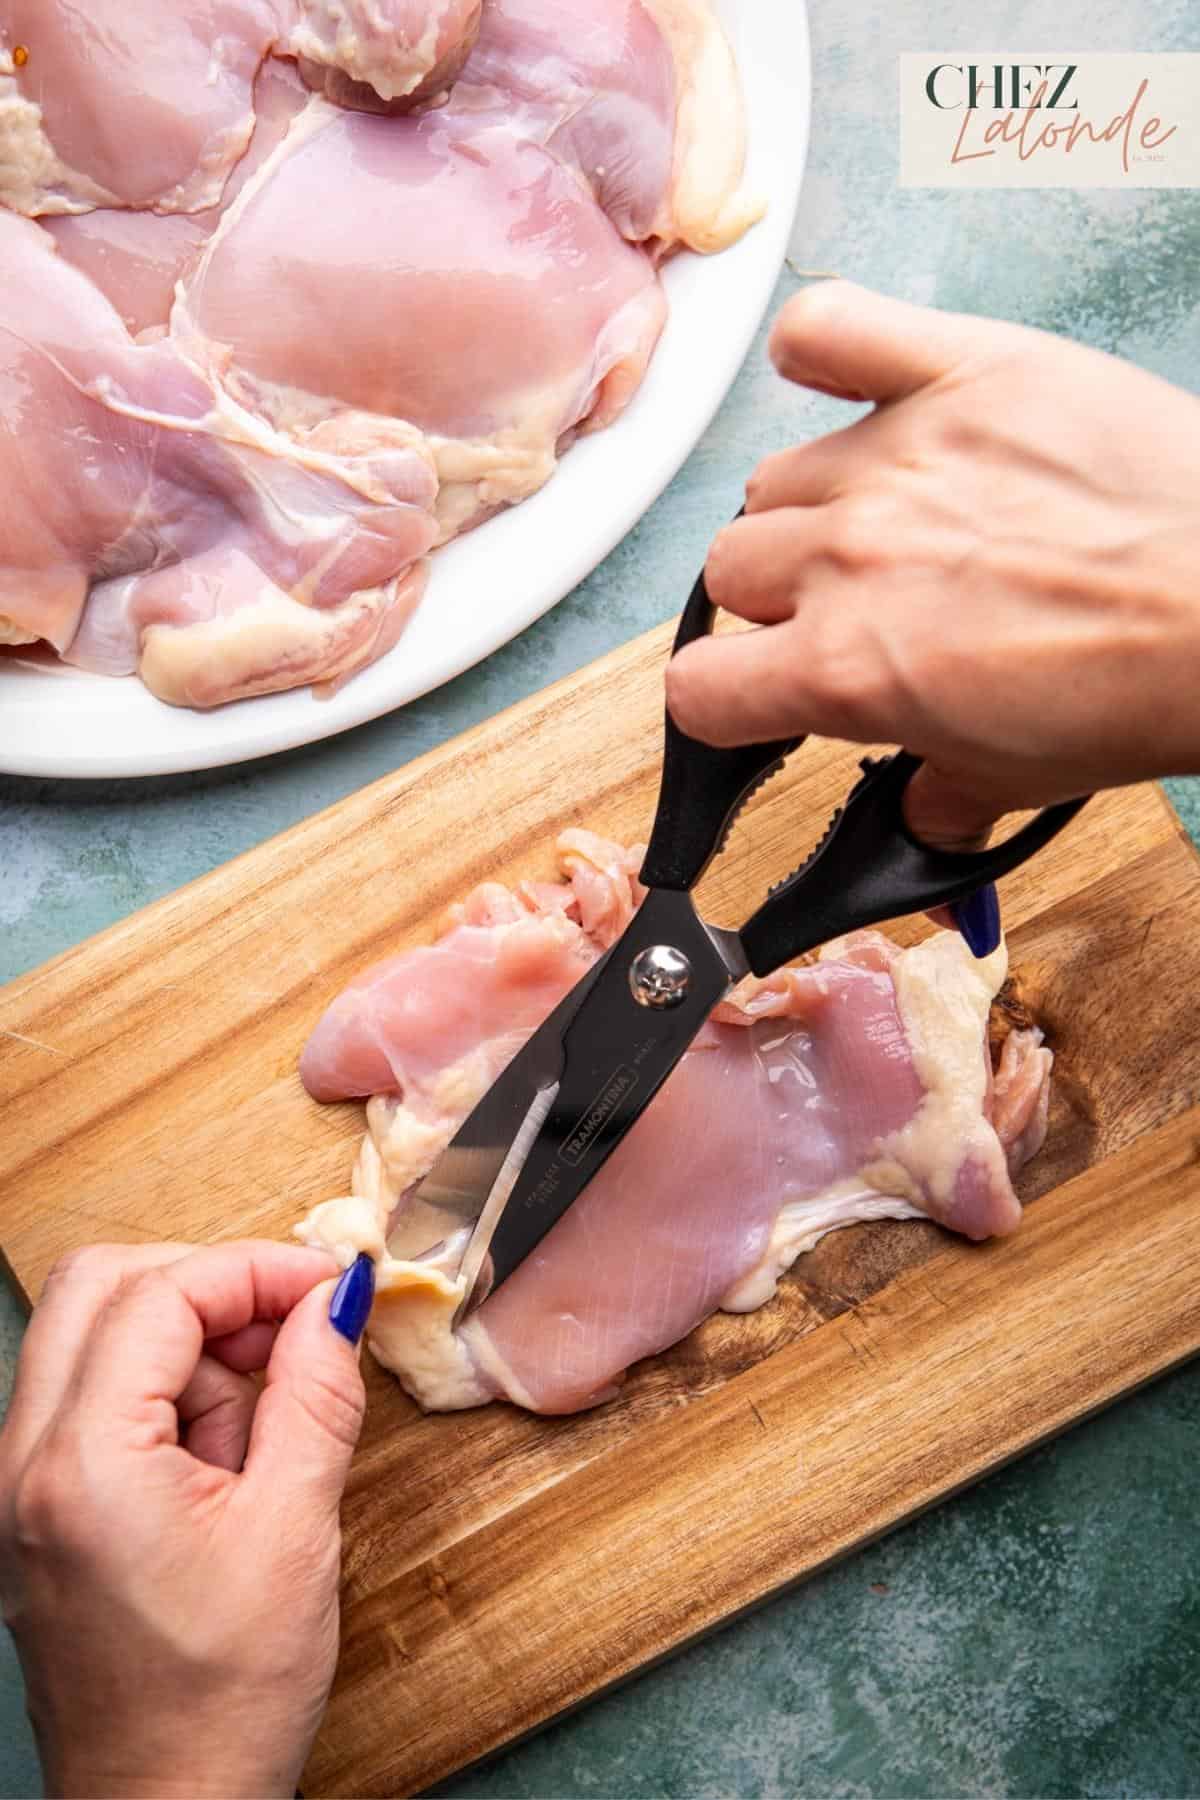 trimming fat and impurities from the chicken thighs with a pair of scissors. 